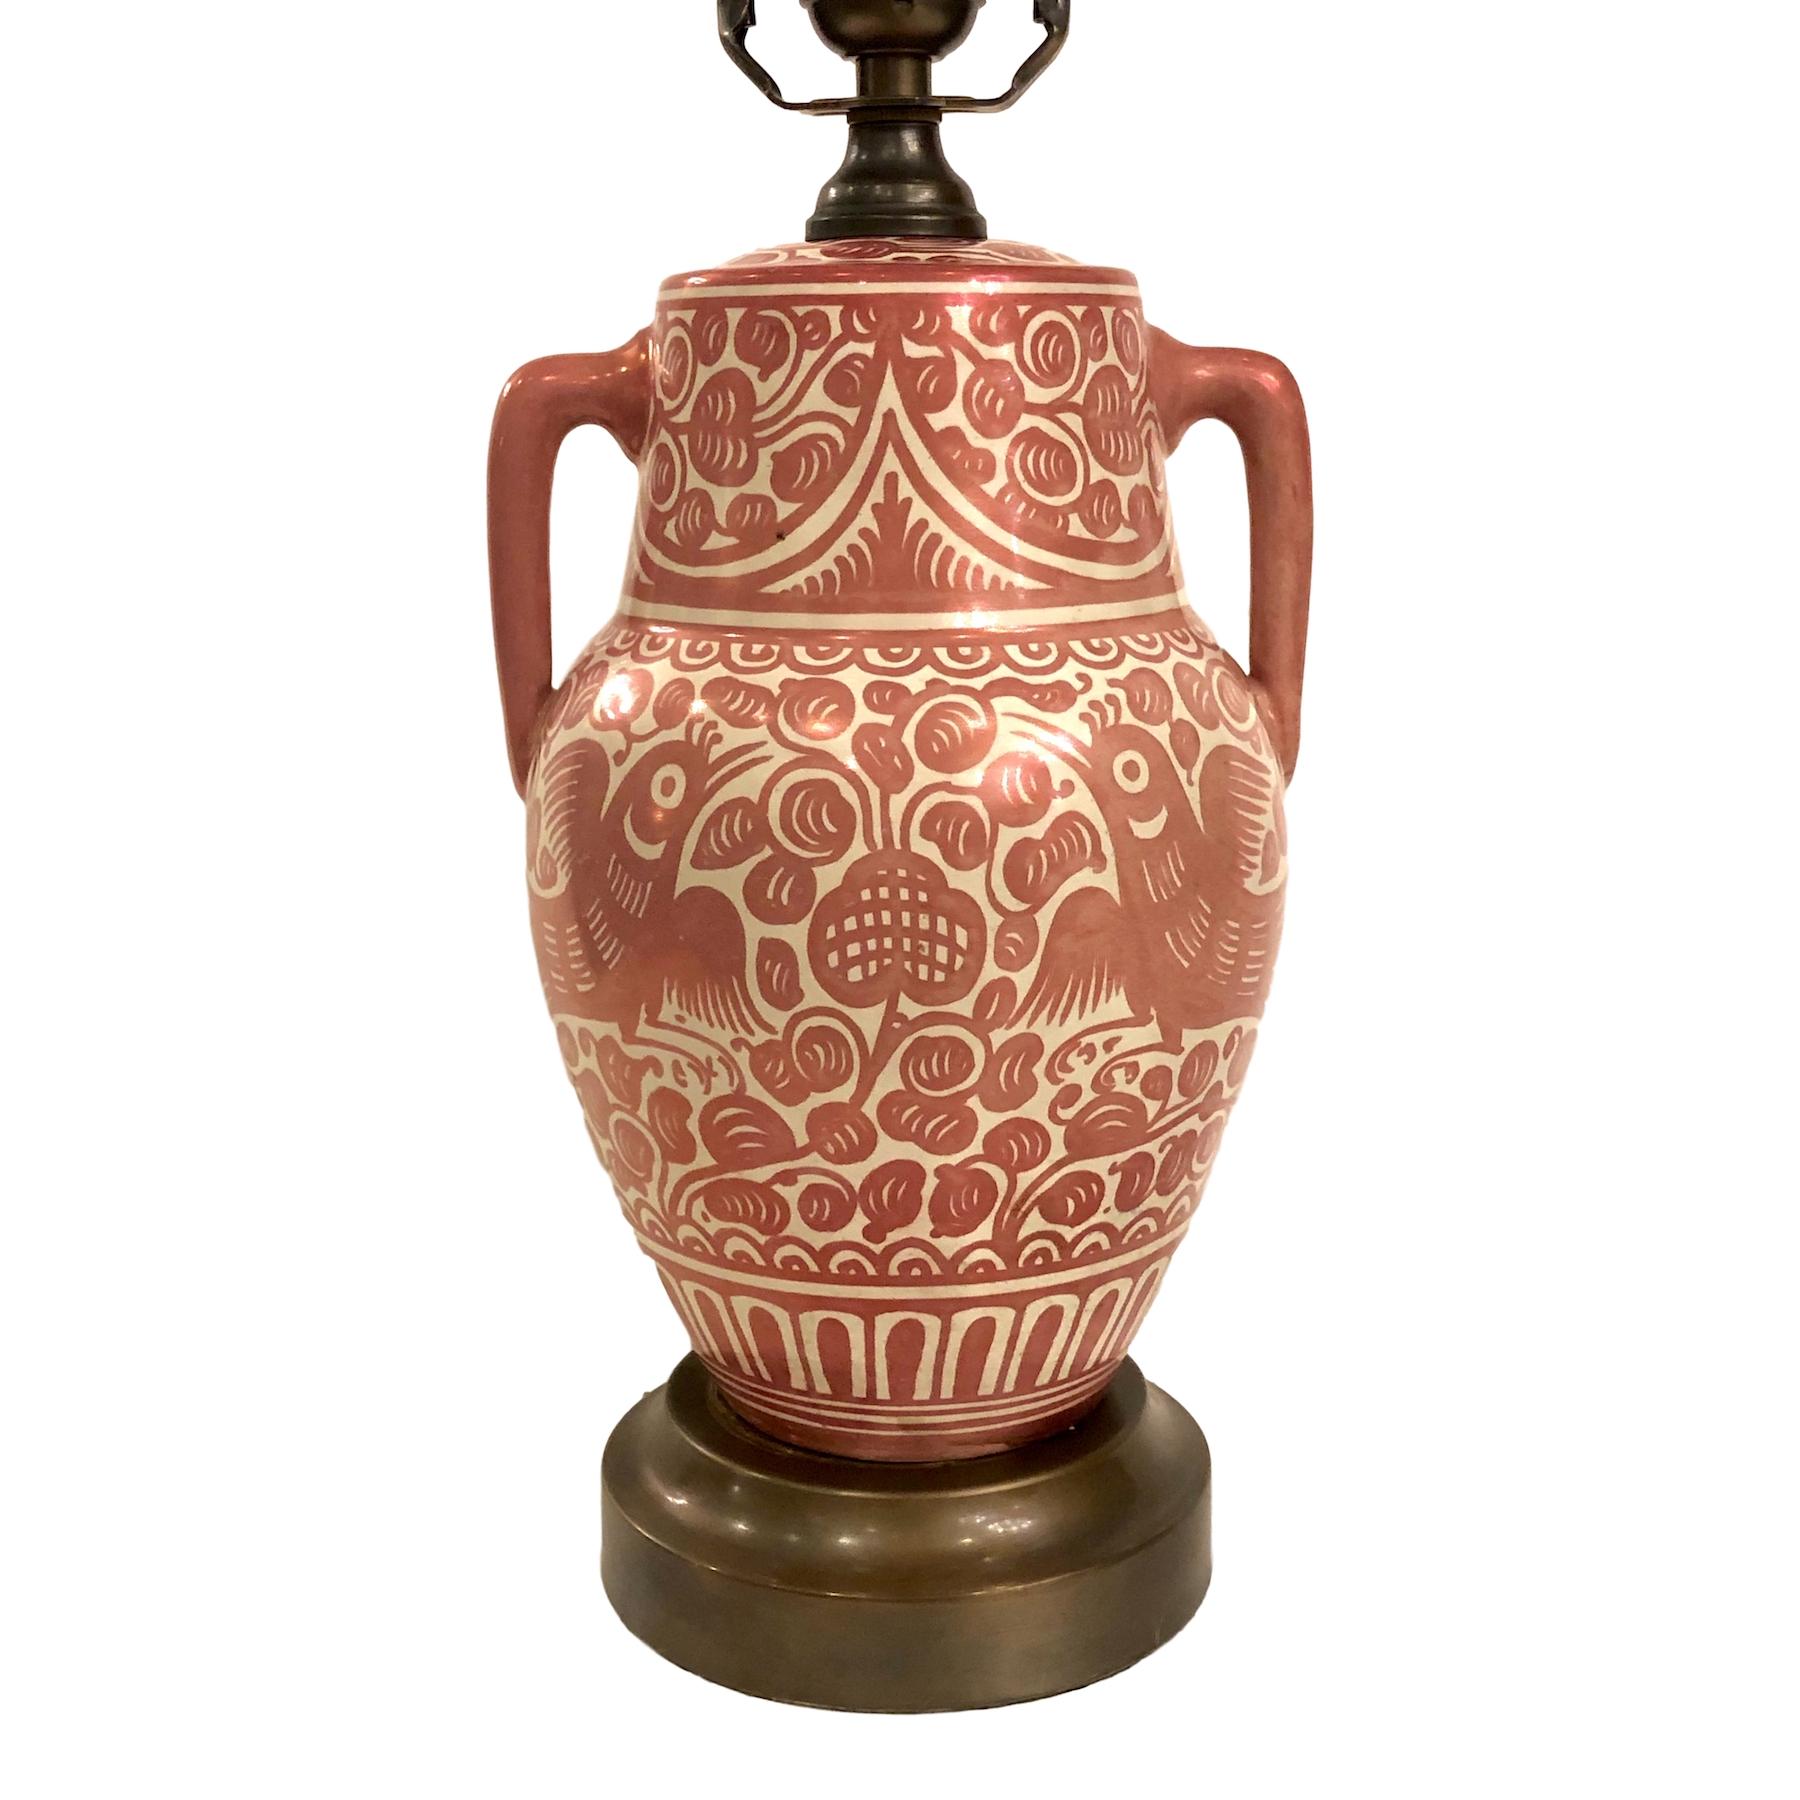 A single circa 1920's Italian hand-painted copper-glazed two-handled ceramic table lamp with foliage and bird motif.

Measurements:
Height of body: 11